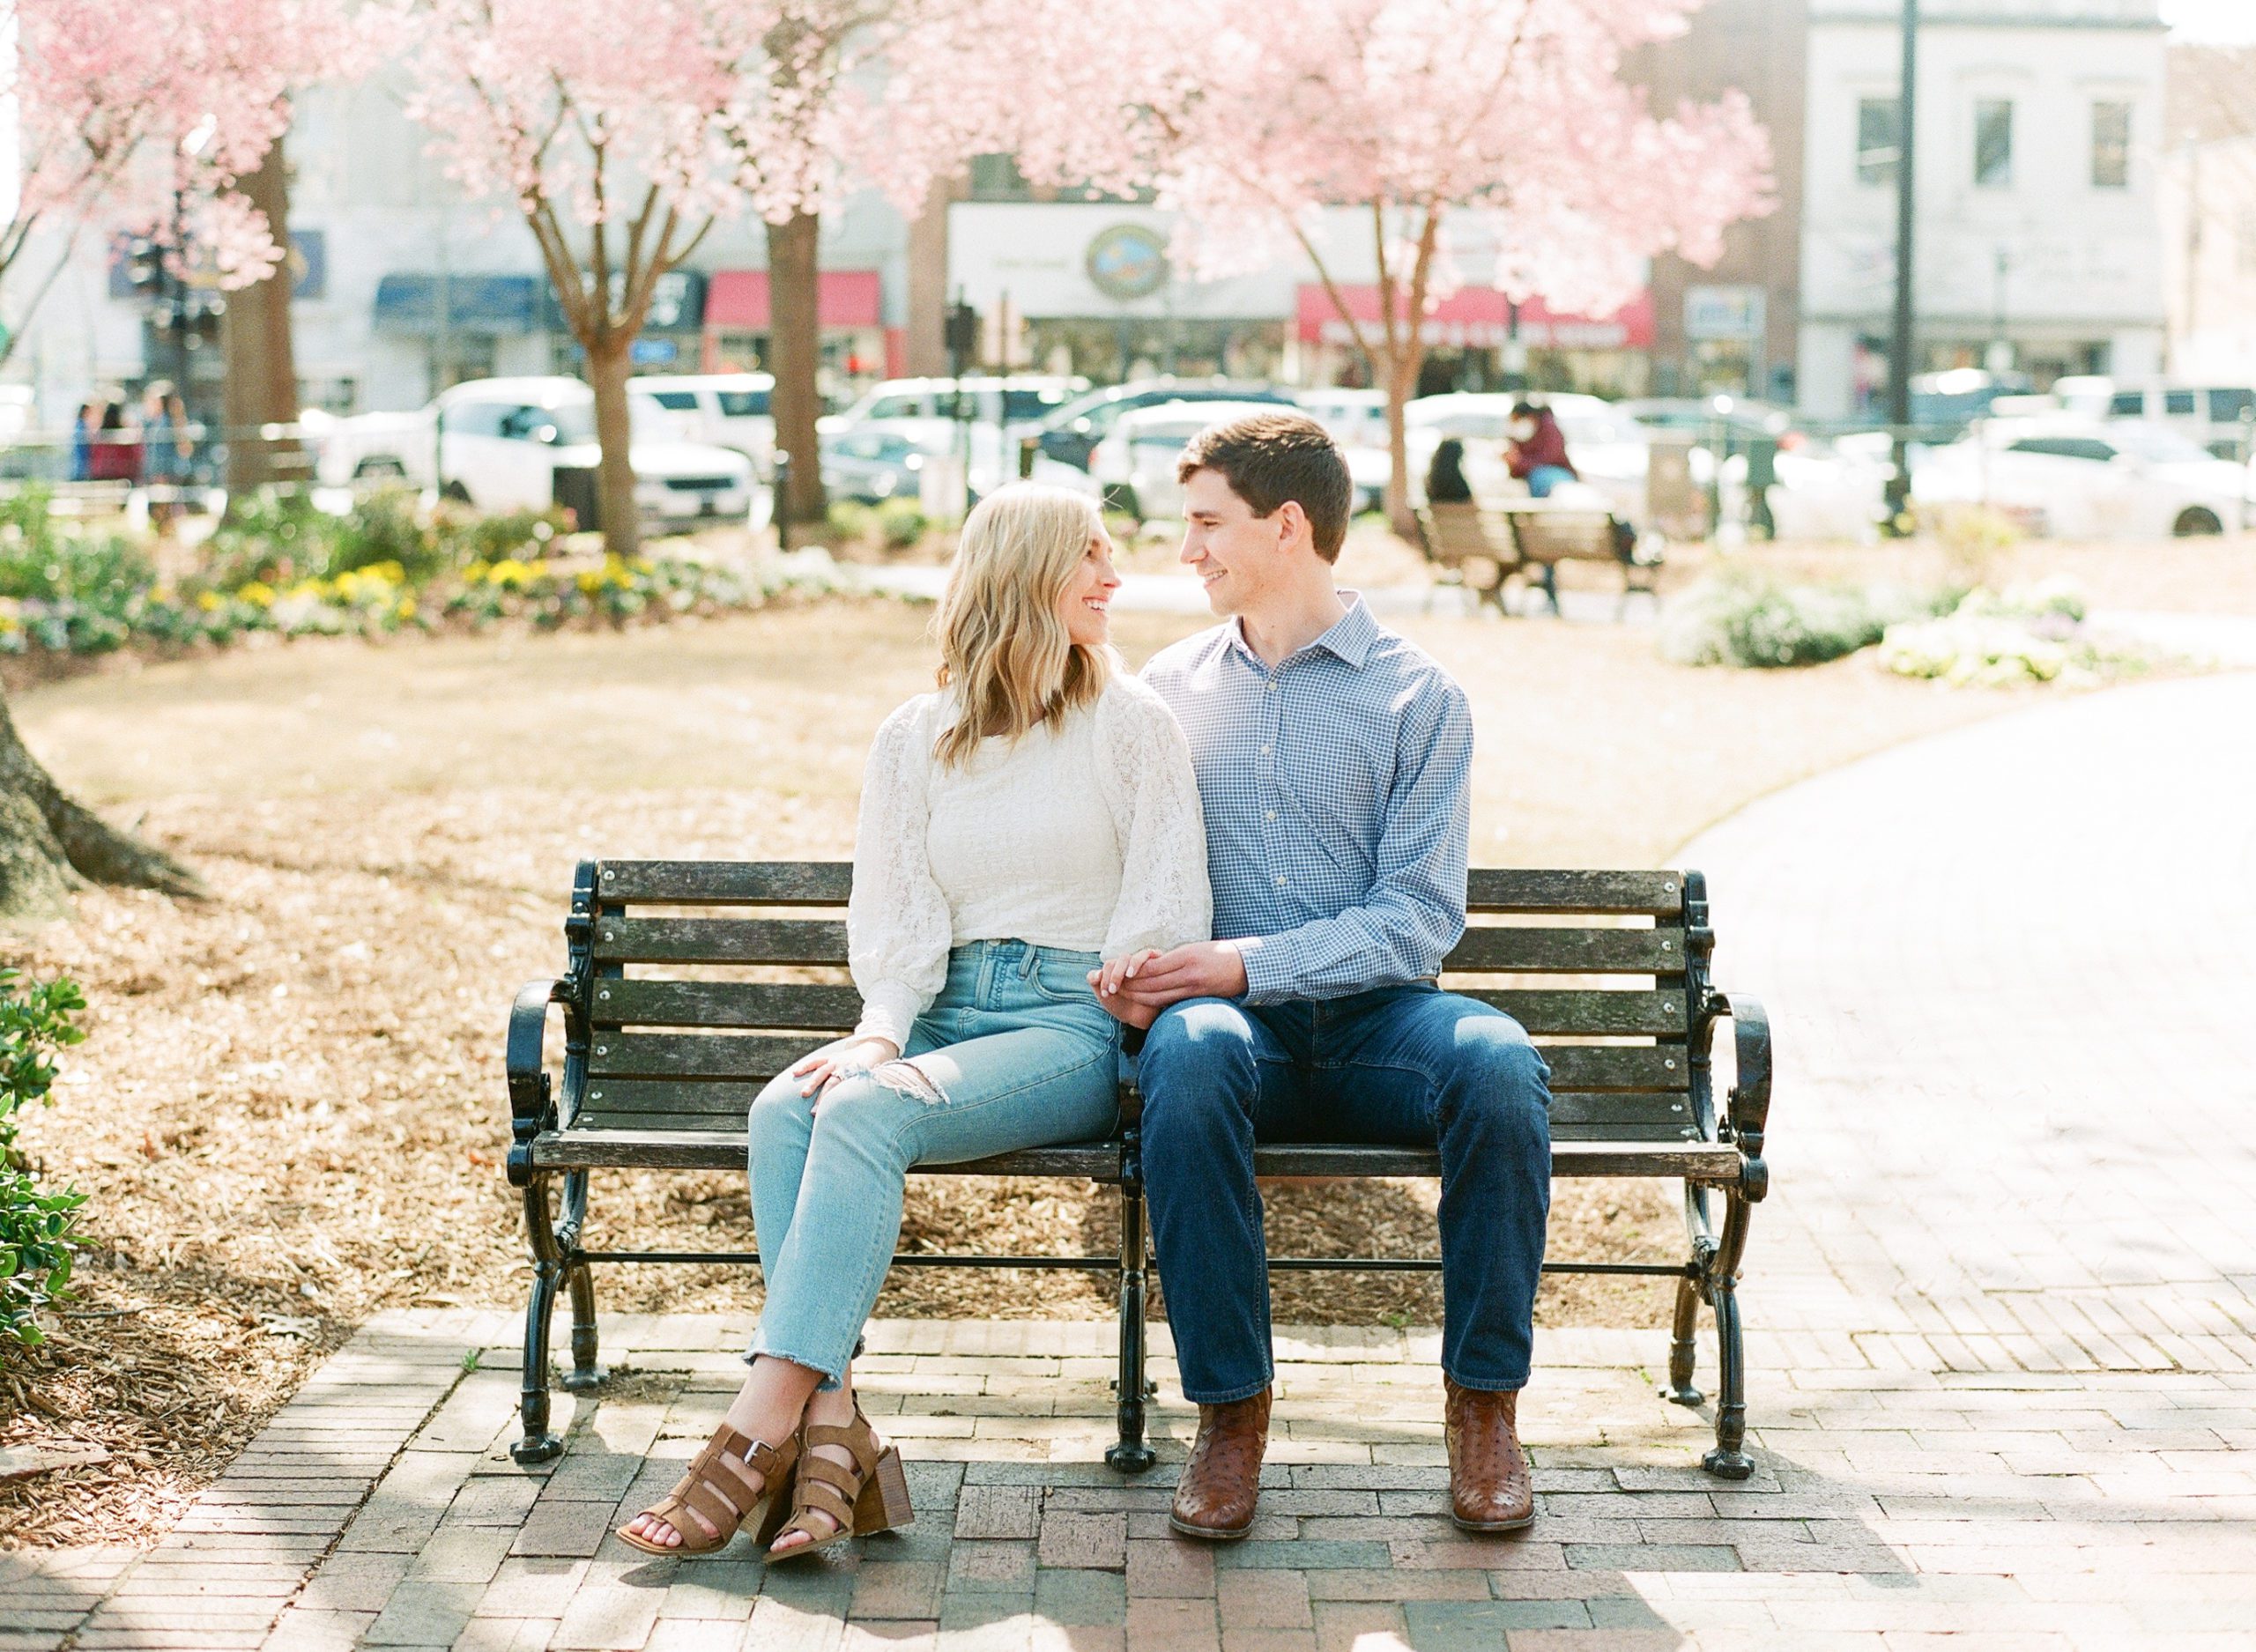 Marietta Square Engagement Photo Session Couple Smiling On Bench Photo